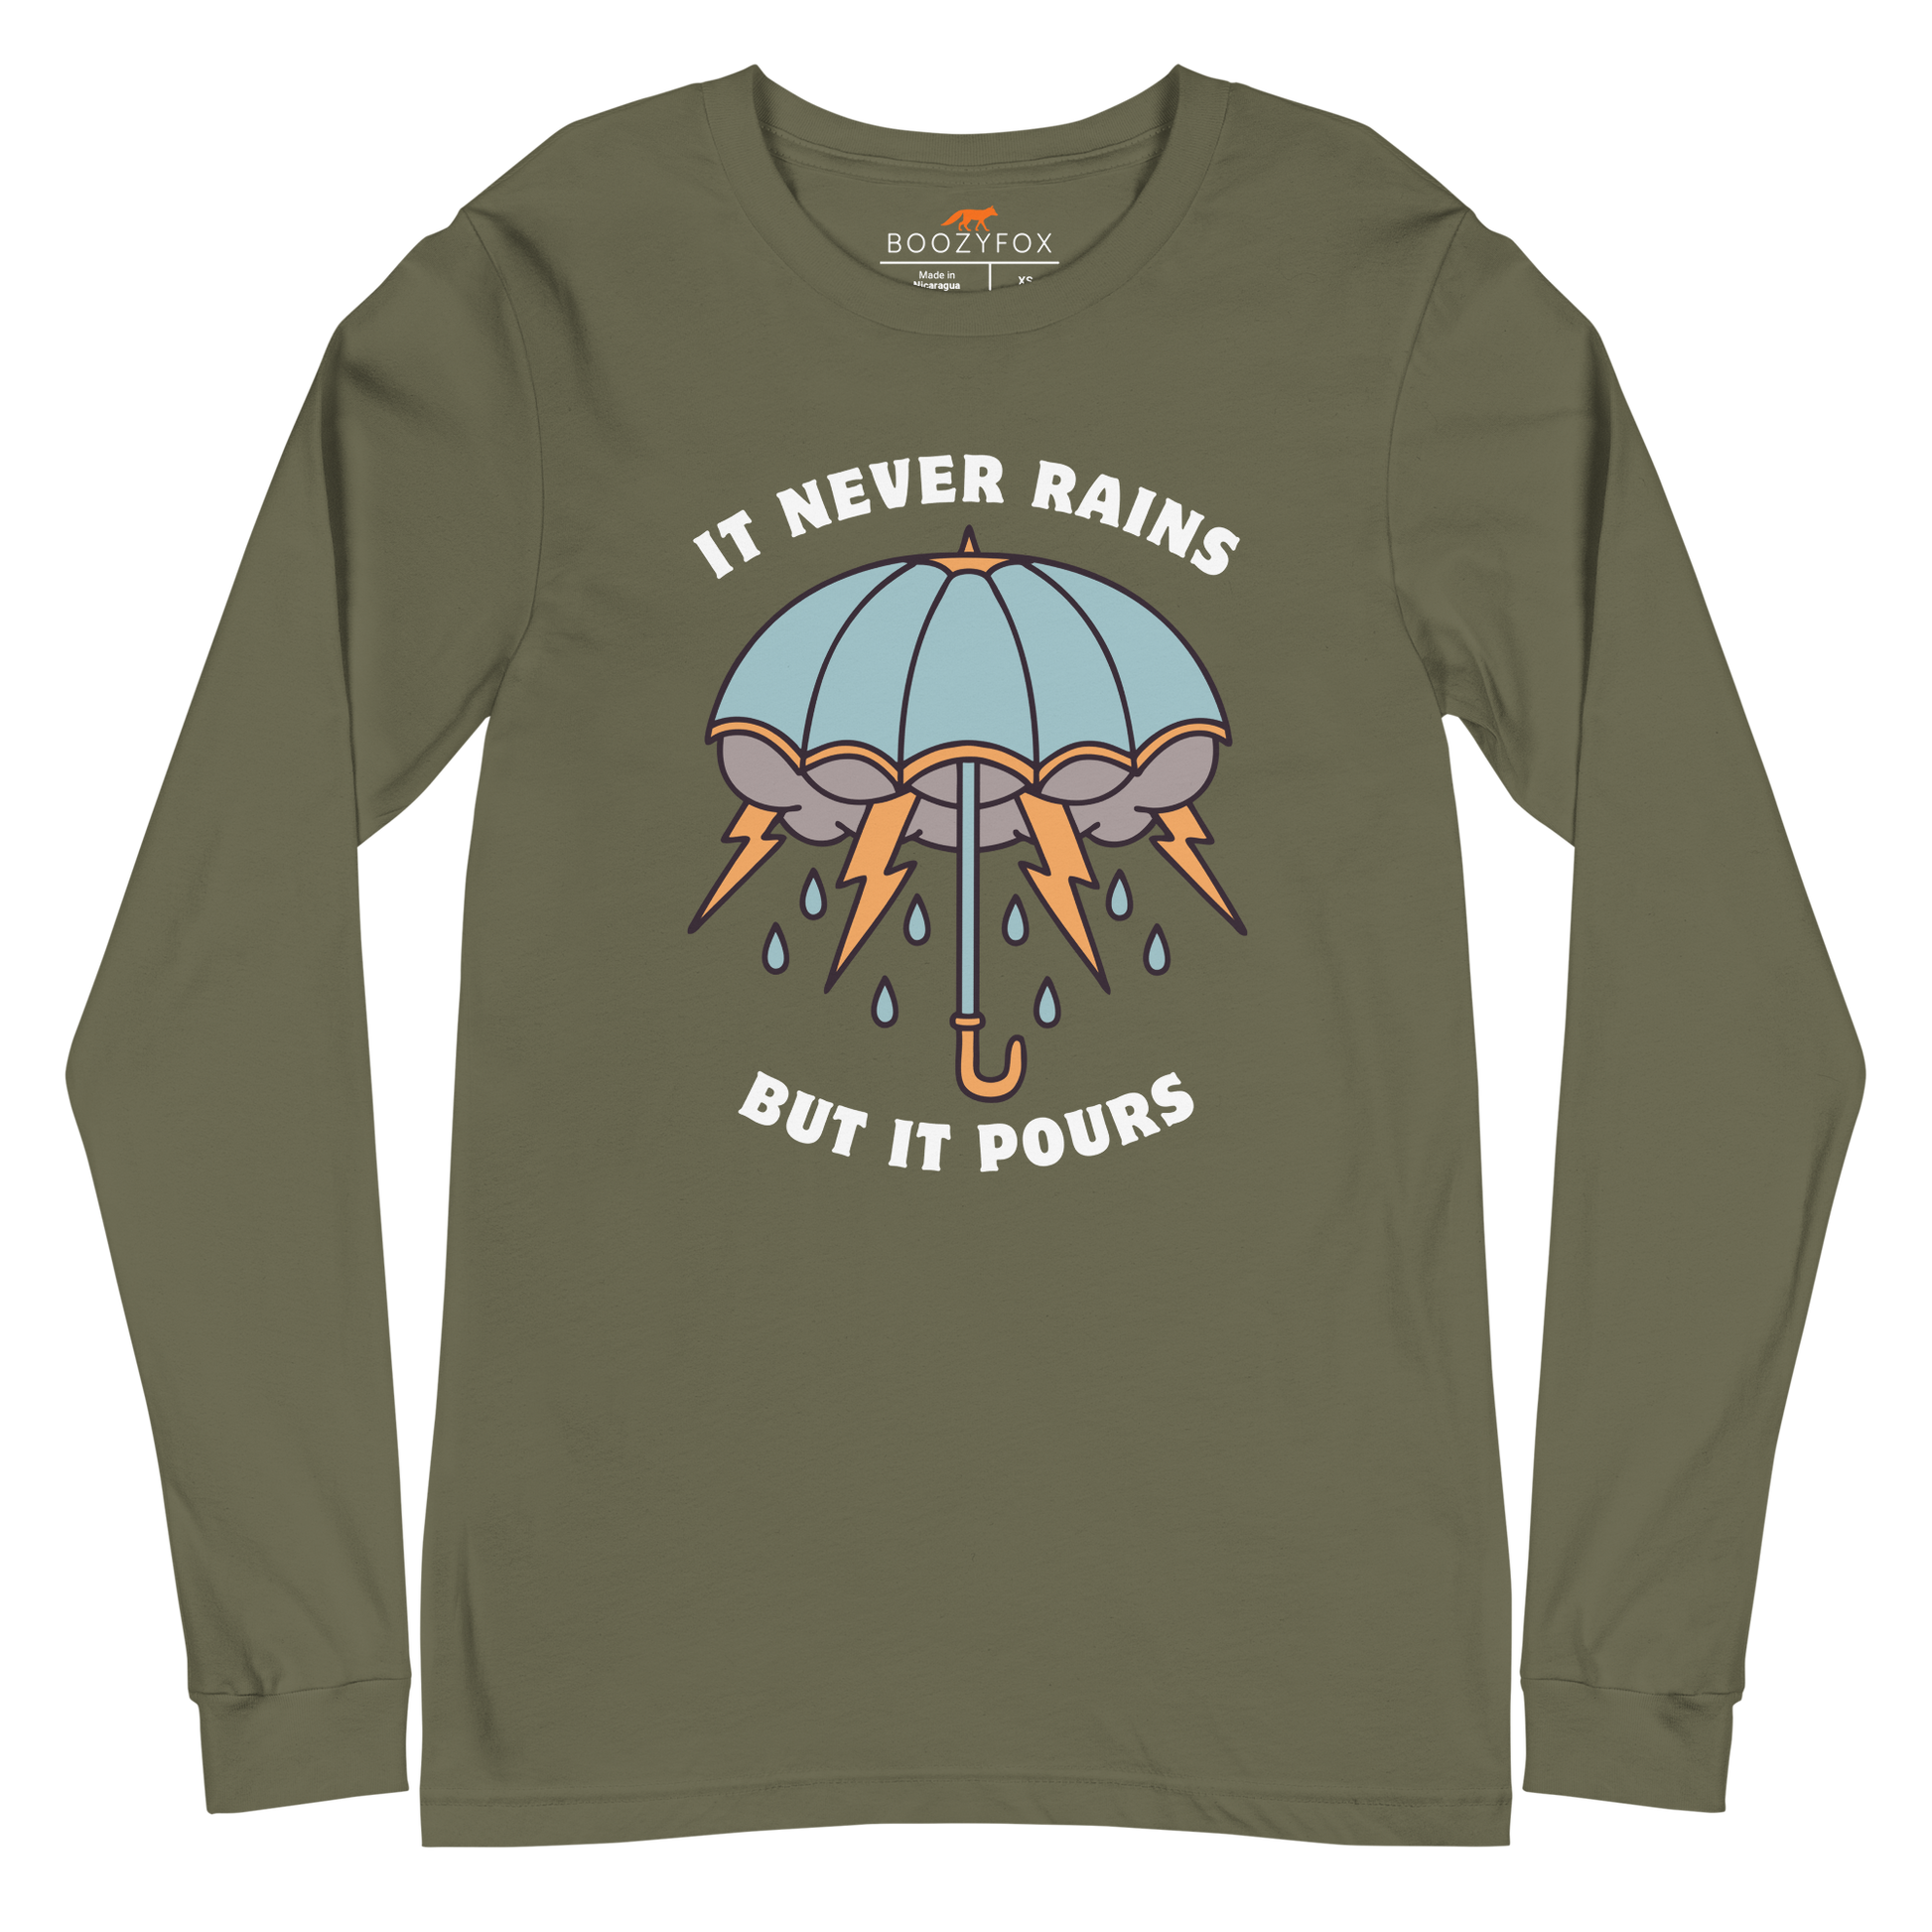 Military Green Umbrella Long Sleeve Tee featuring a unique It Never Rains But It Pours graphic on the chest - Cool Tattoo-Inspired Umbrella Long Sleeve Graphic Tees - Boozy Fox